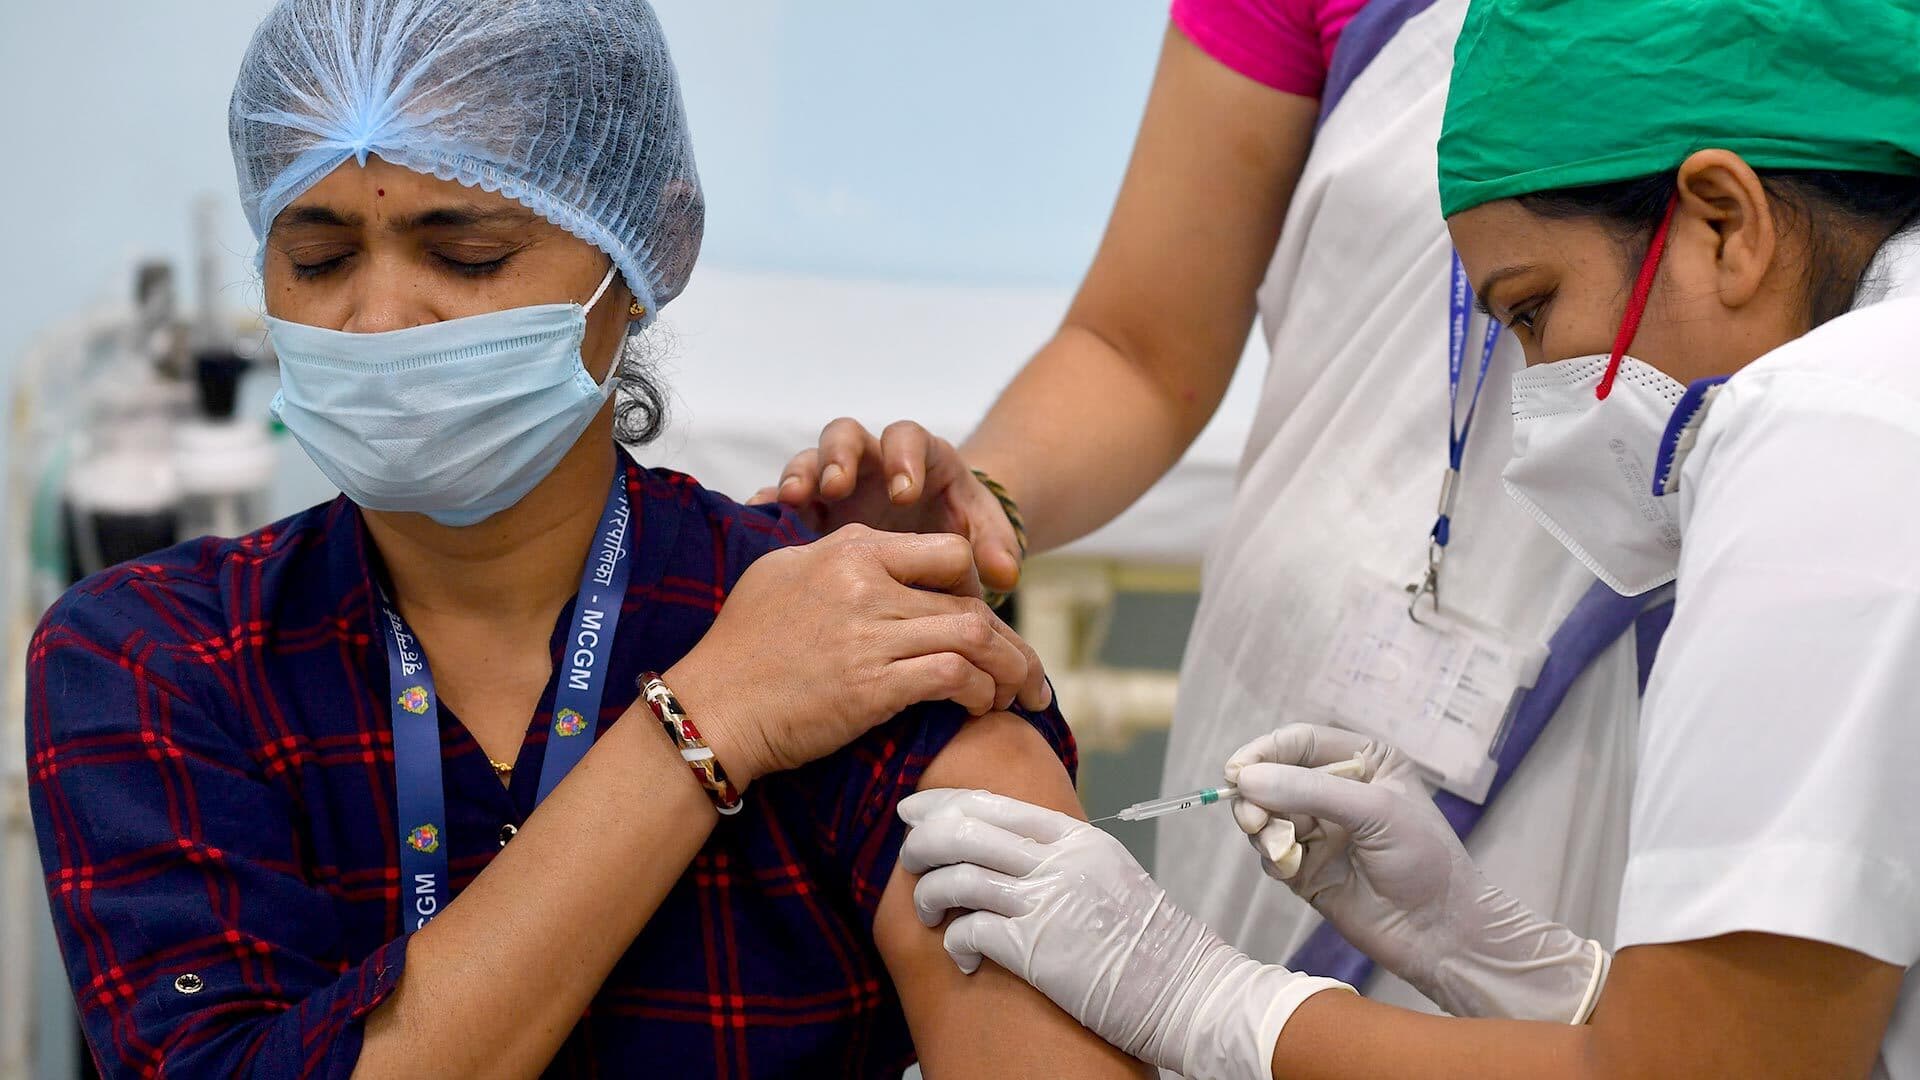 A medical worker inoculates a colleague with a Covid-19 coronavirus vaccine at the Rajawadi Hospital in Mumbai.